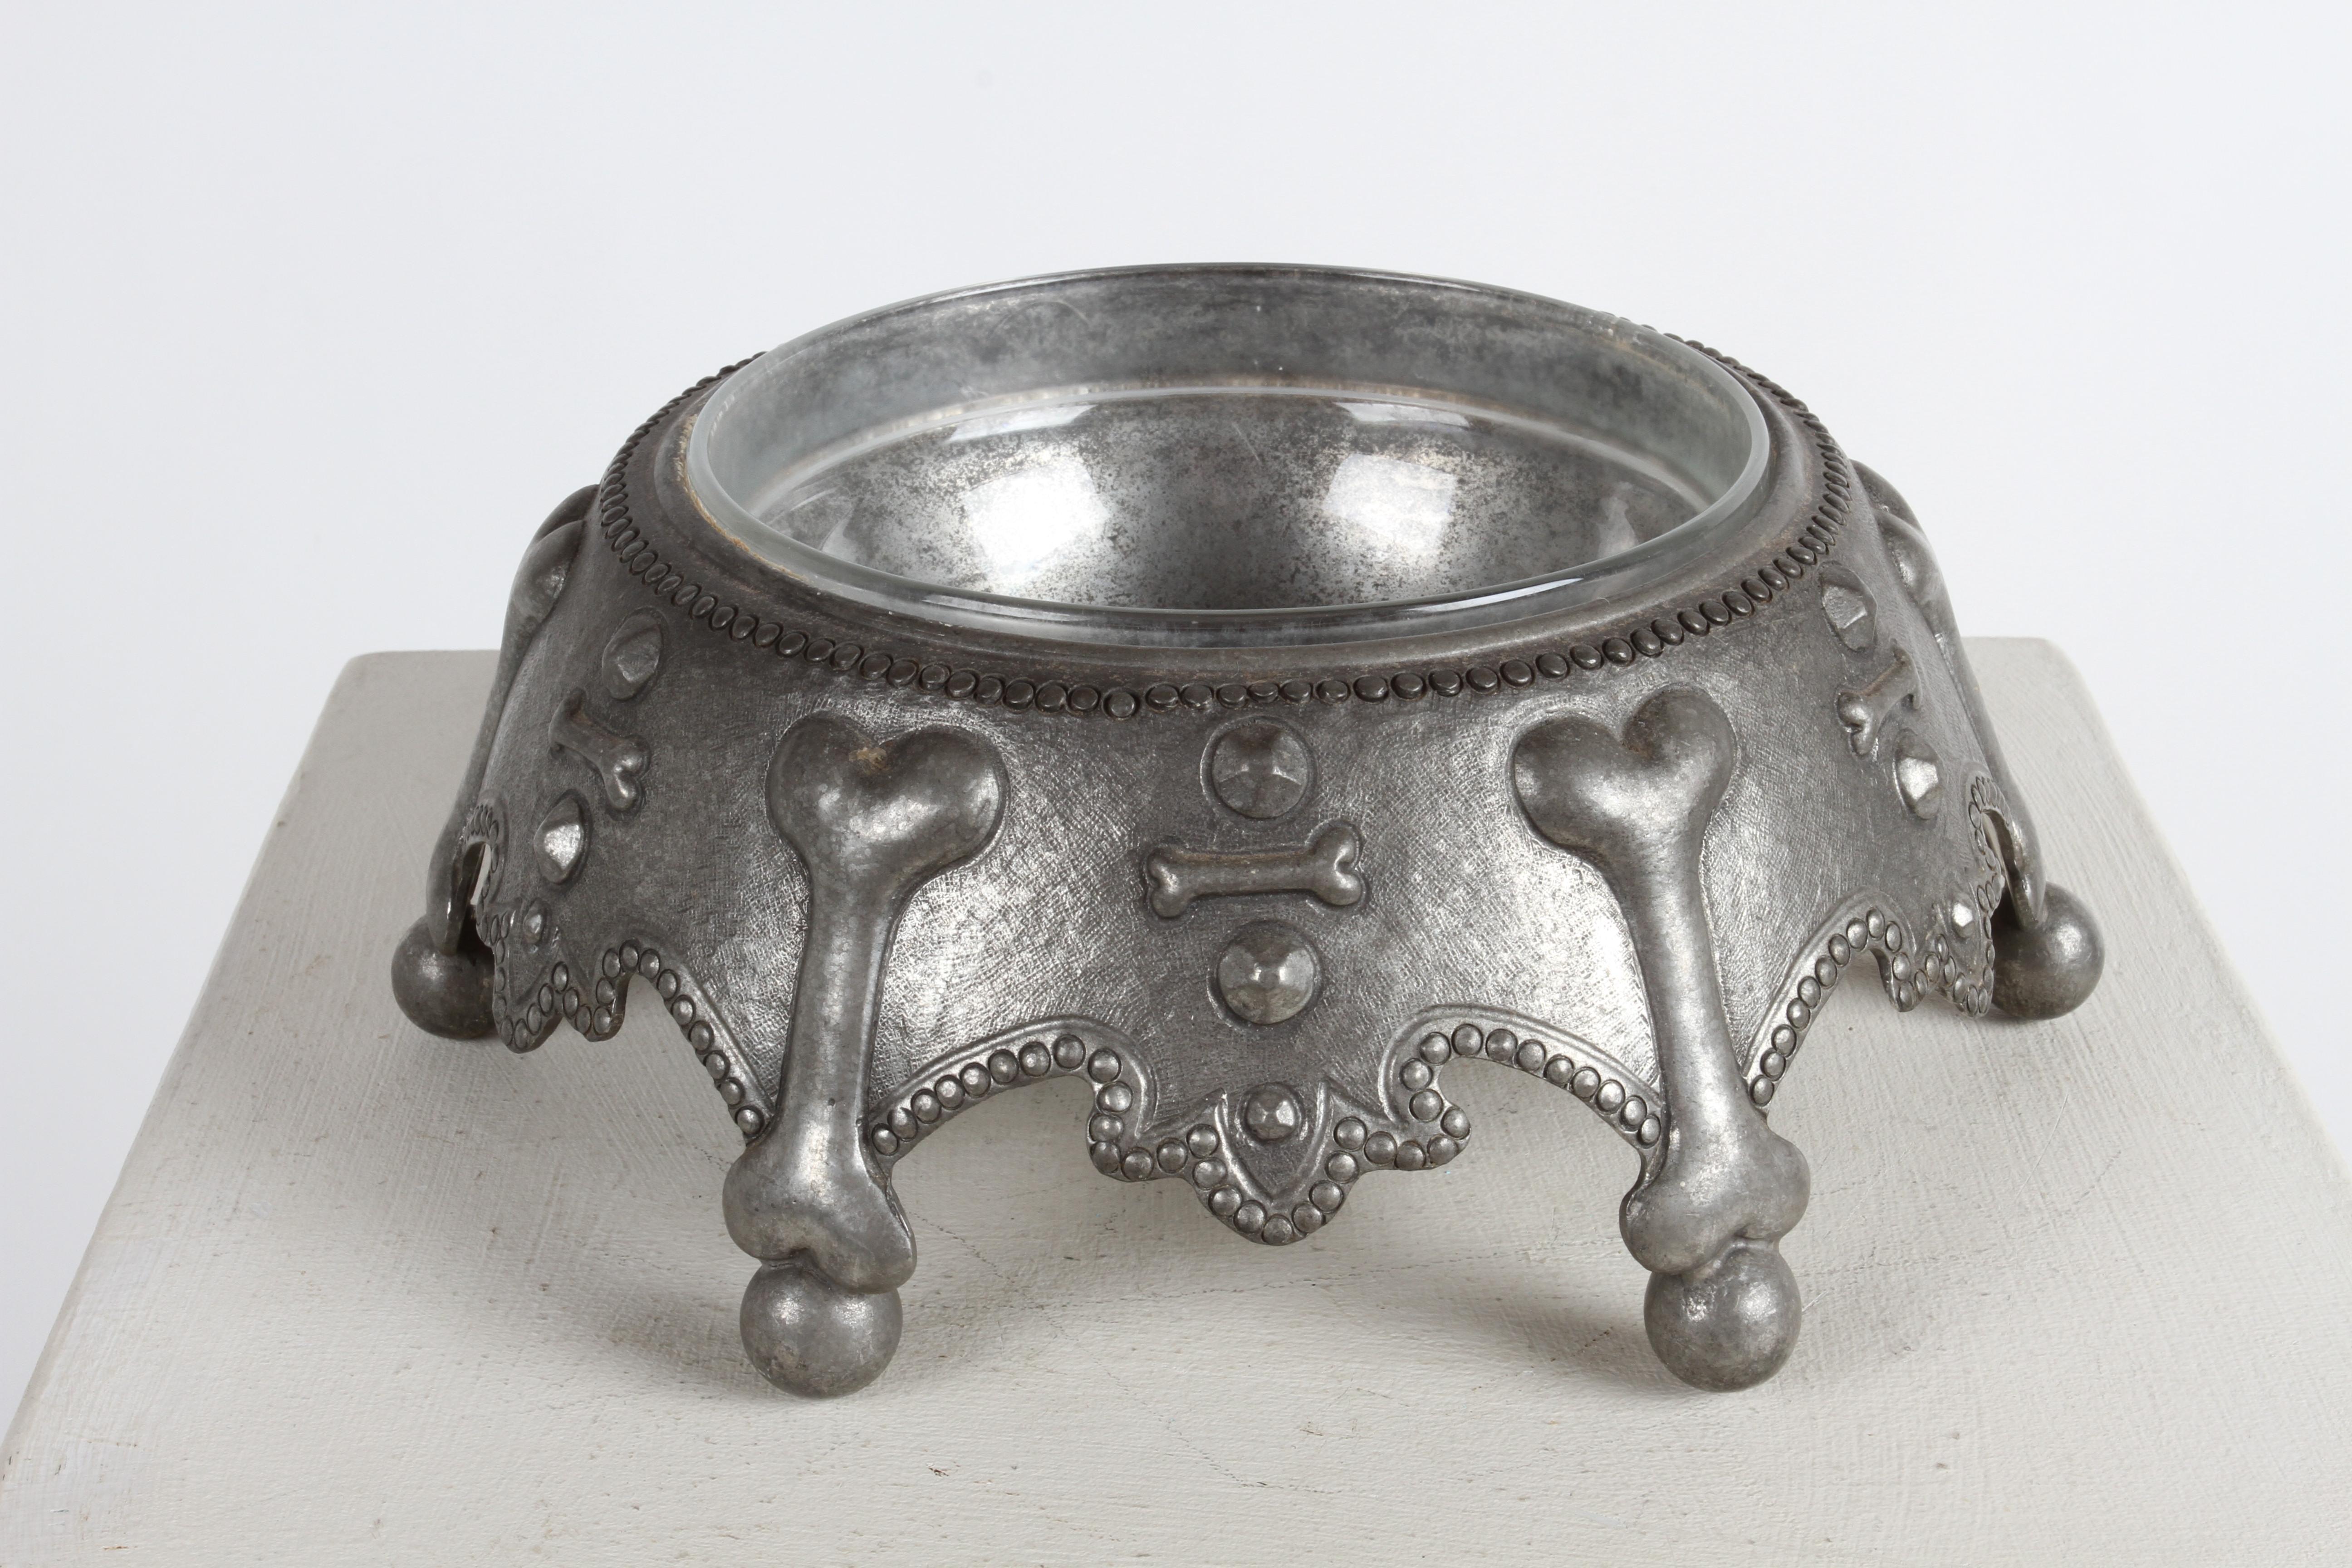 Large Piero Figura for Atena dog bowl, this signed pewter with glass lined upside down crown, having a dog bone motif rests on ball feet. Wonderful warm patina to the pewter, wash it periodically with water and neutral soap and then wipe it with a